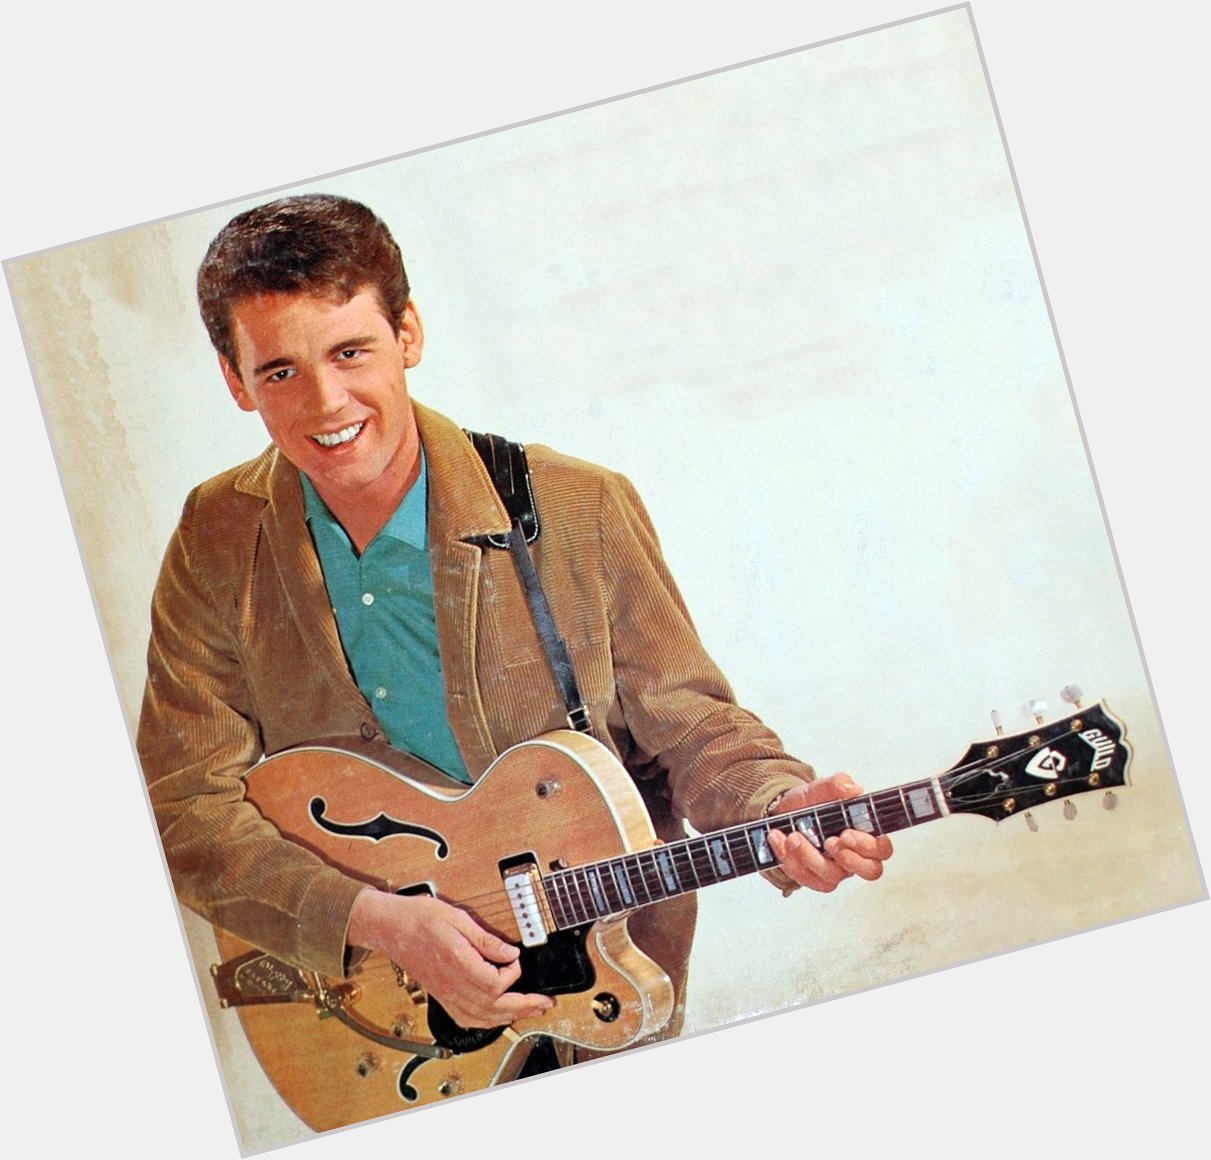 A massive Happy Birthday to guitar legend Duane Eddy, born on this day in Corning, New York in 1938.    